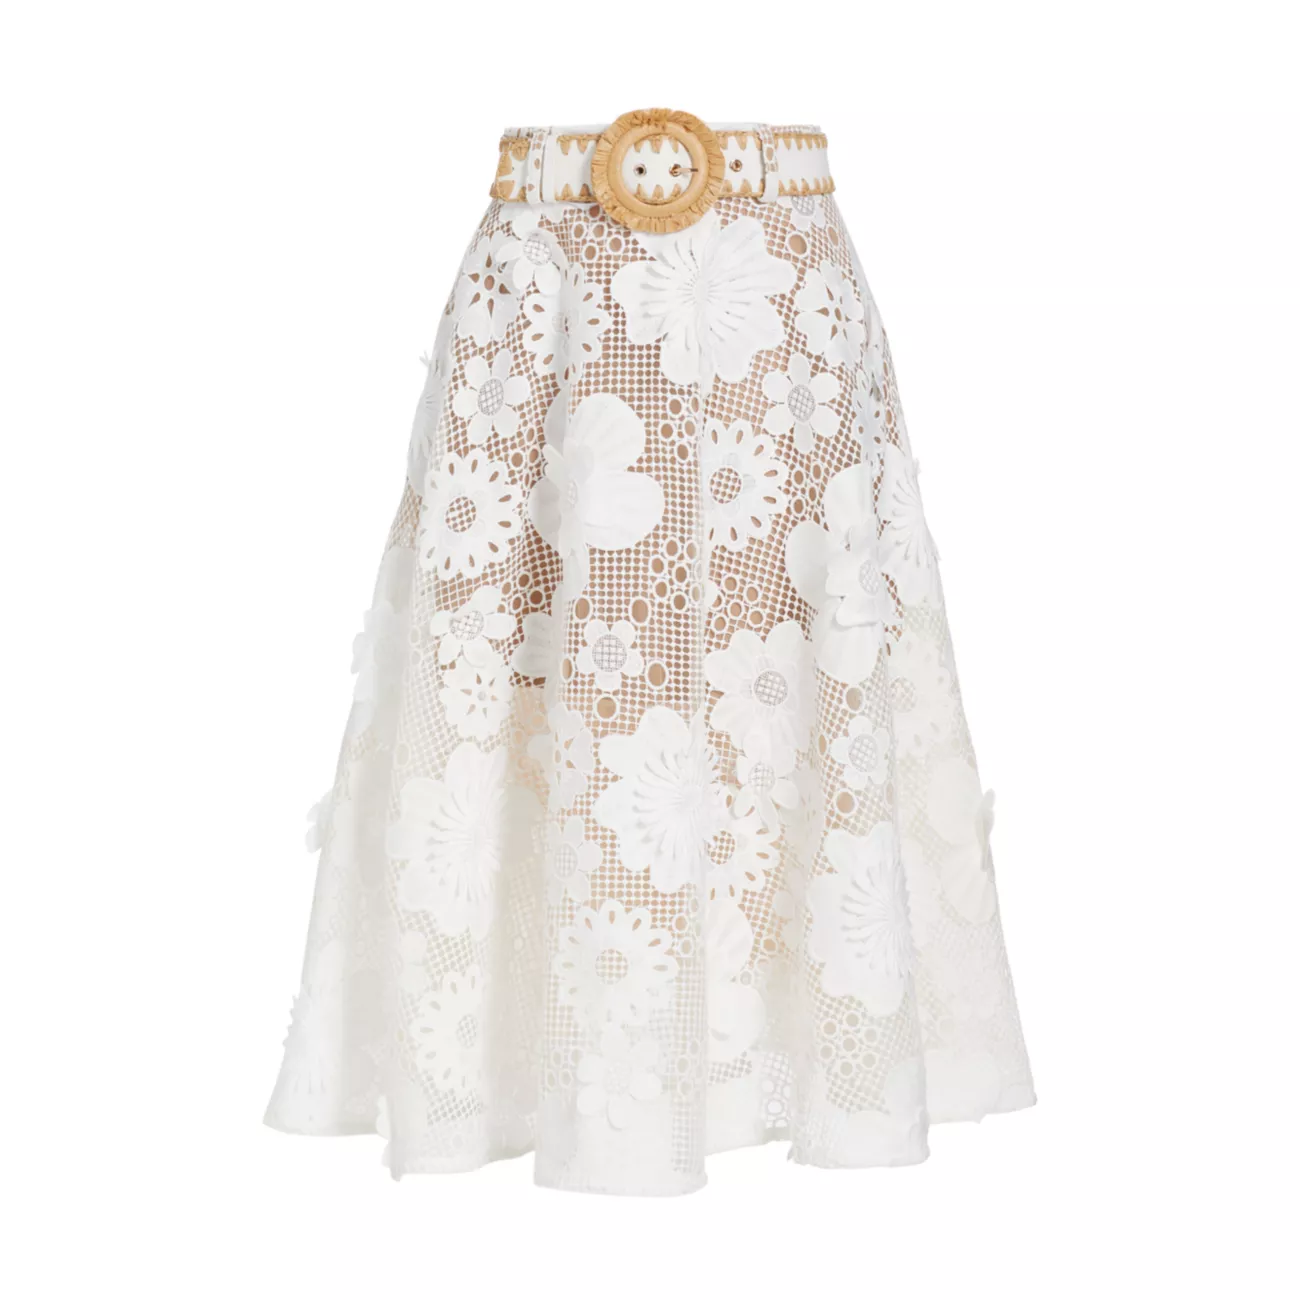 Emerie Floral Lace Midi-Skirt Bronx and Banco